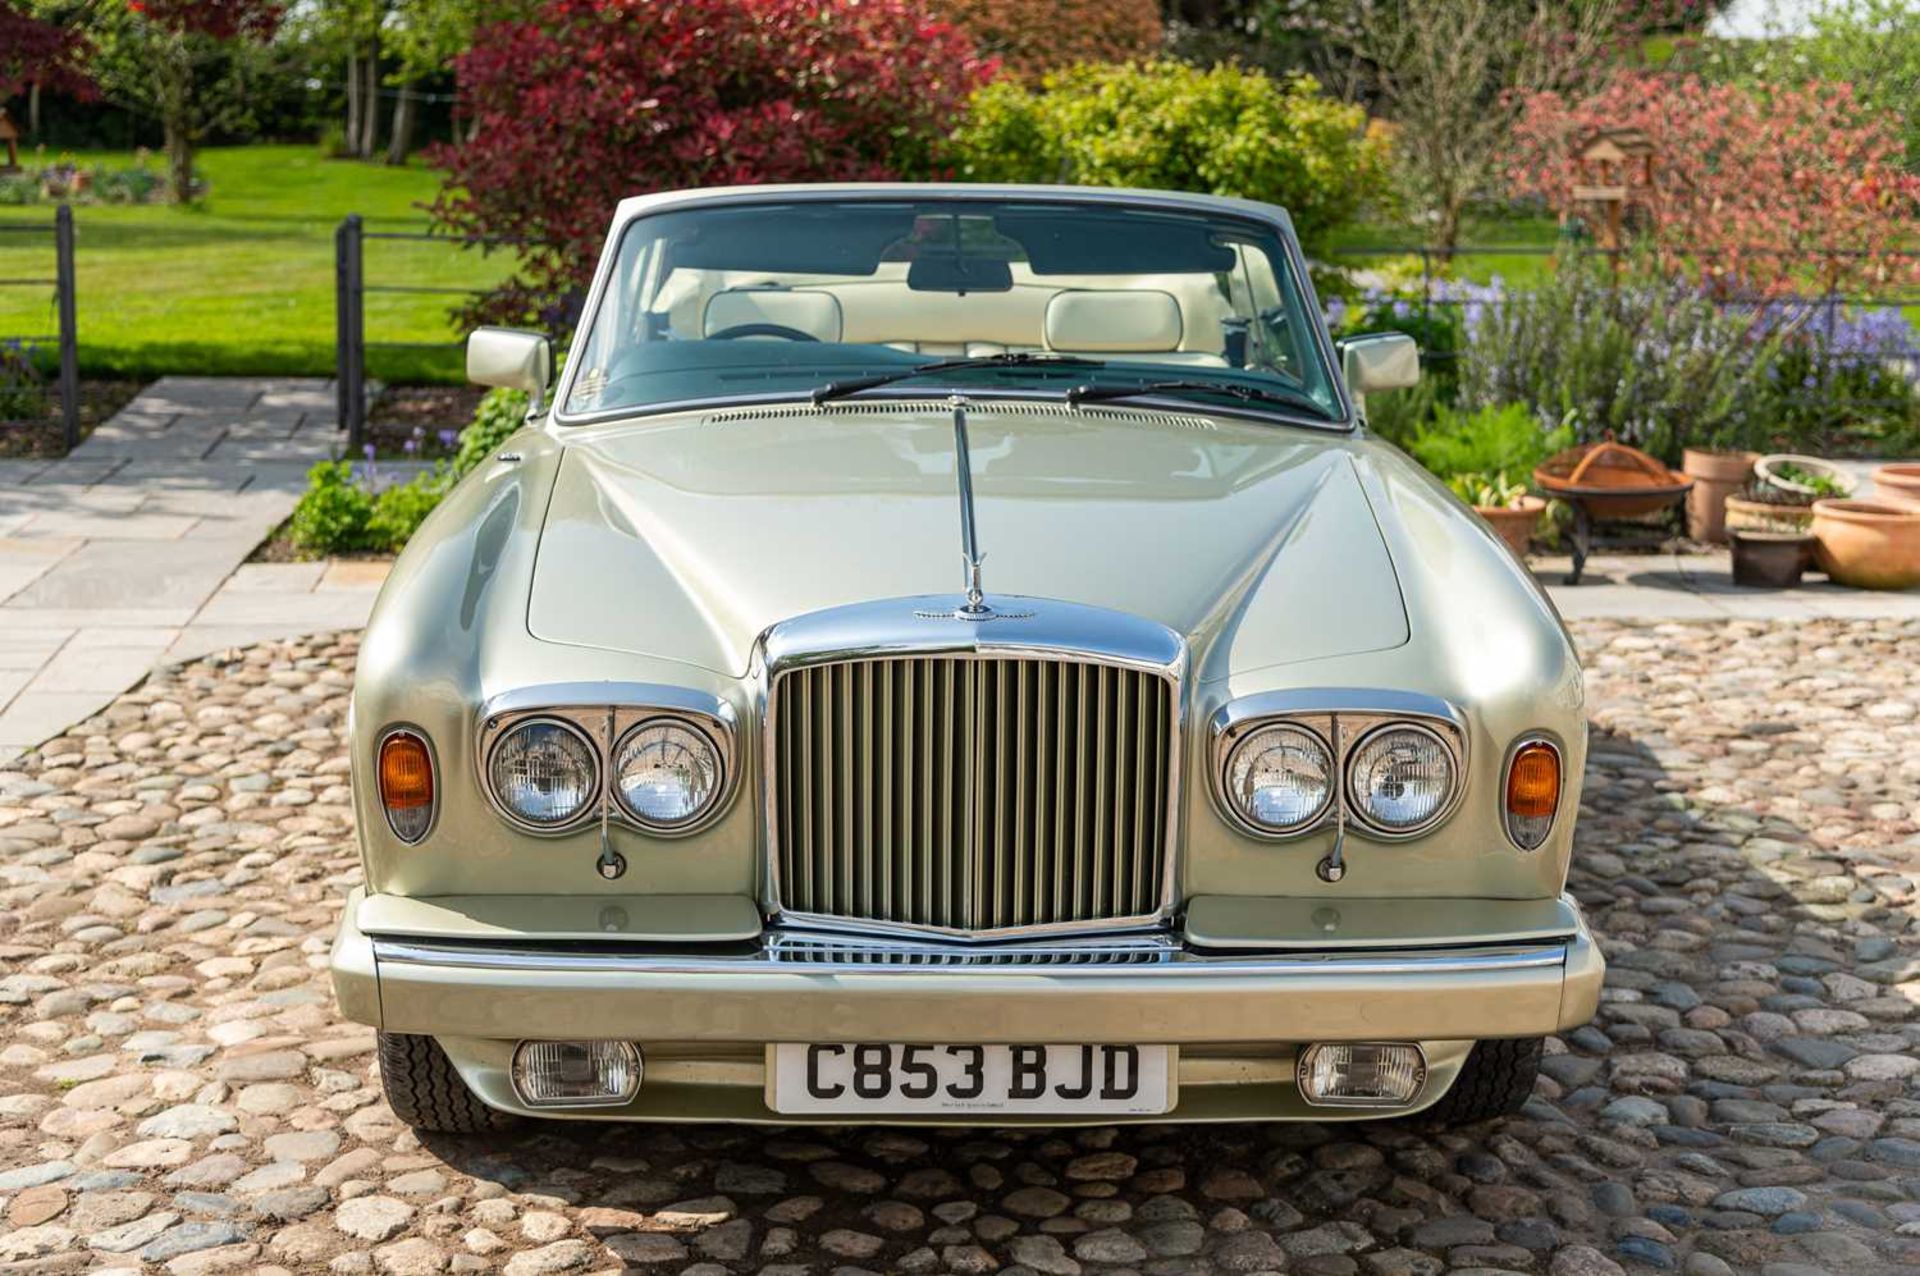 1985 Bentley Continental Convertible Rare early carburettor model by Mulliner Park Ward - Image 20 of 76